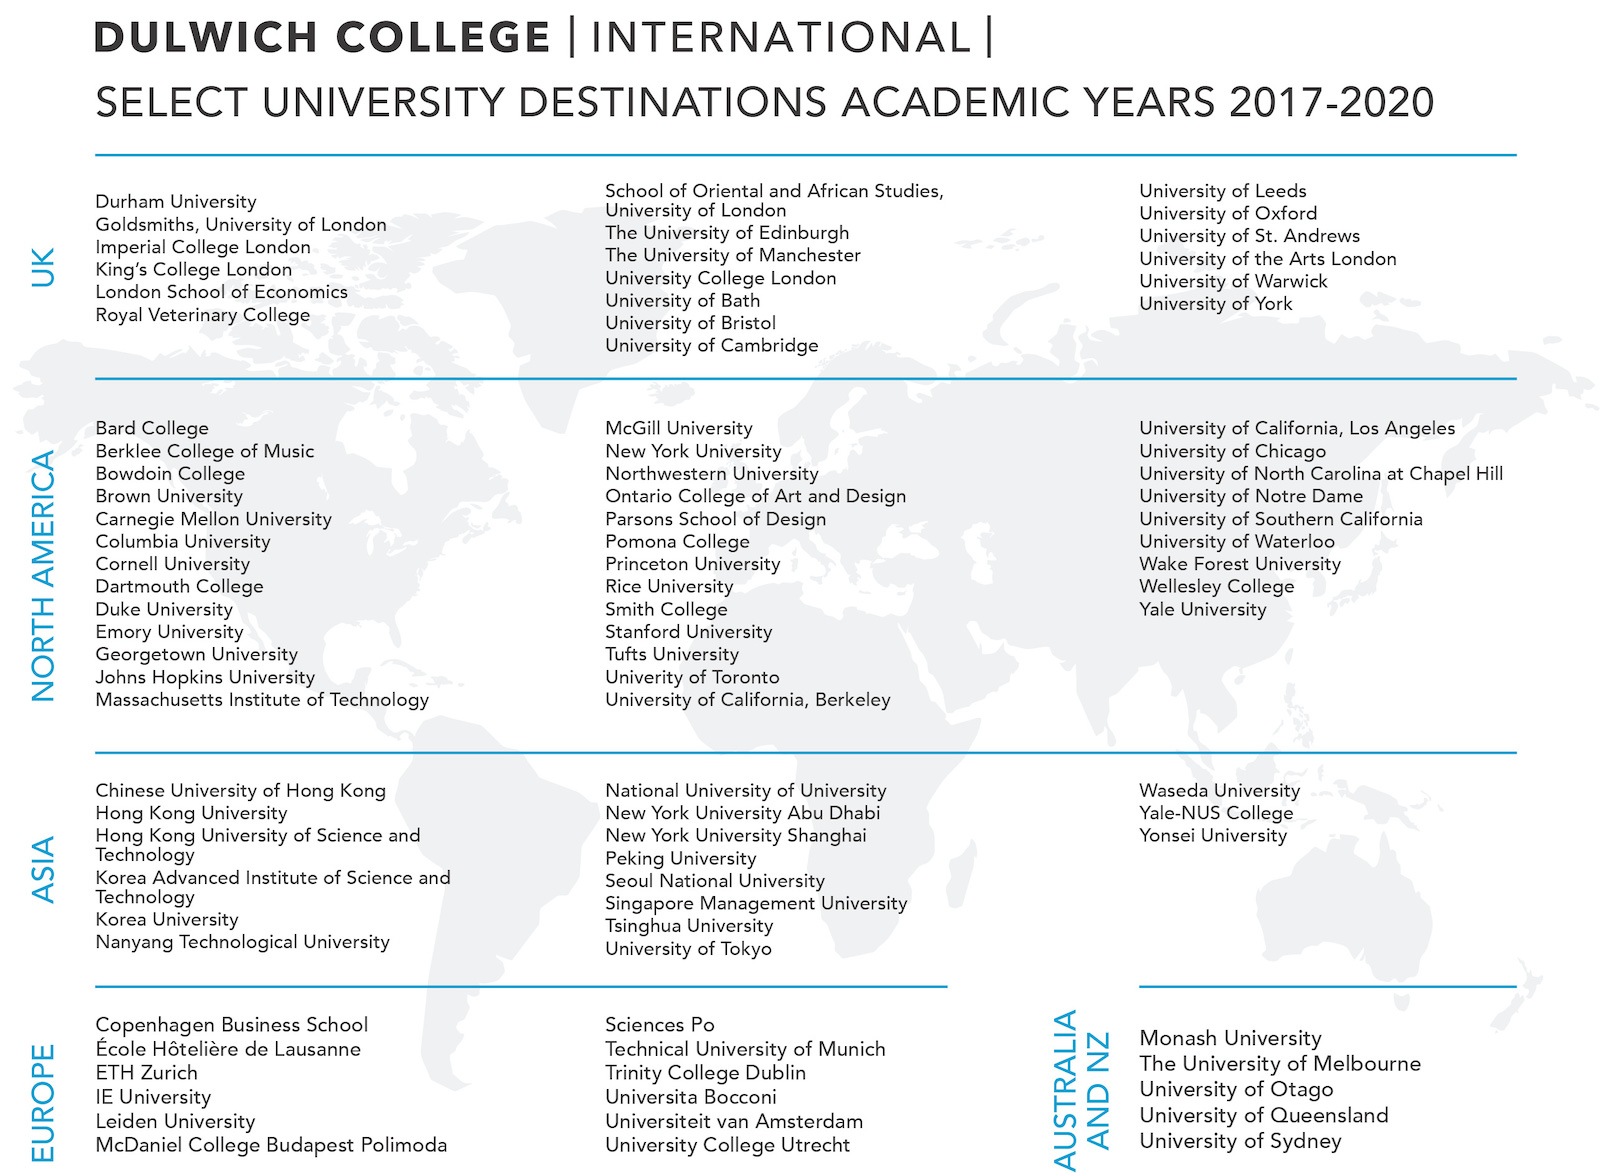 University Destination of Dulwich College International for academic years 2017 - 2020